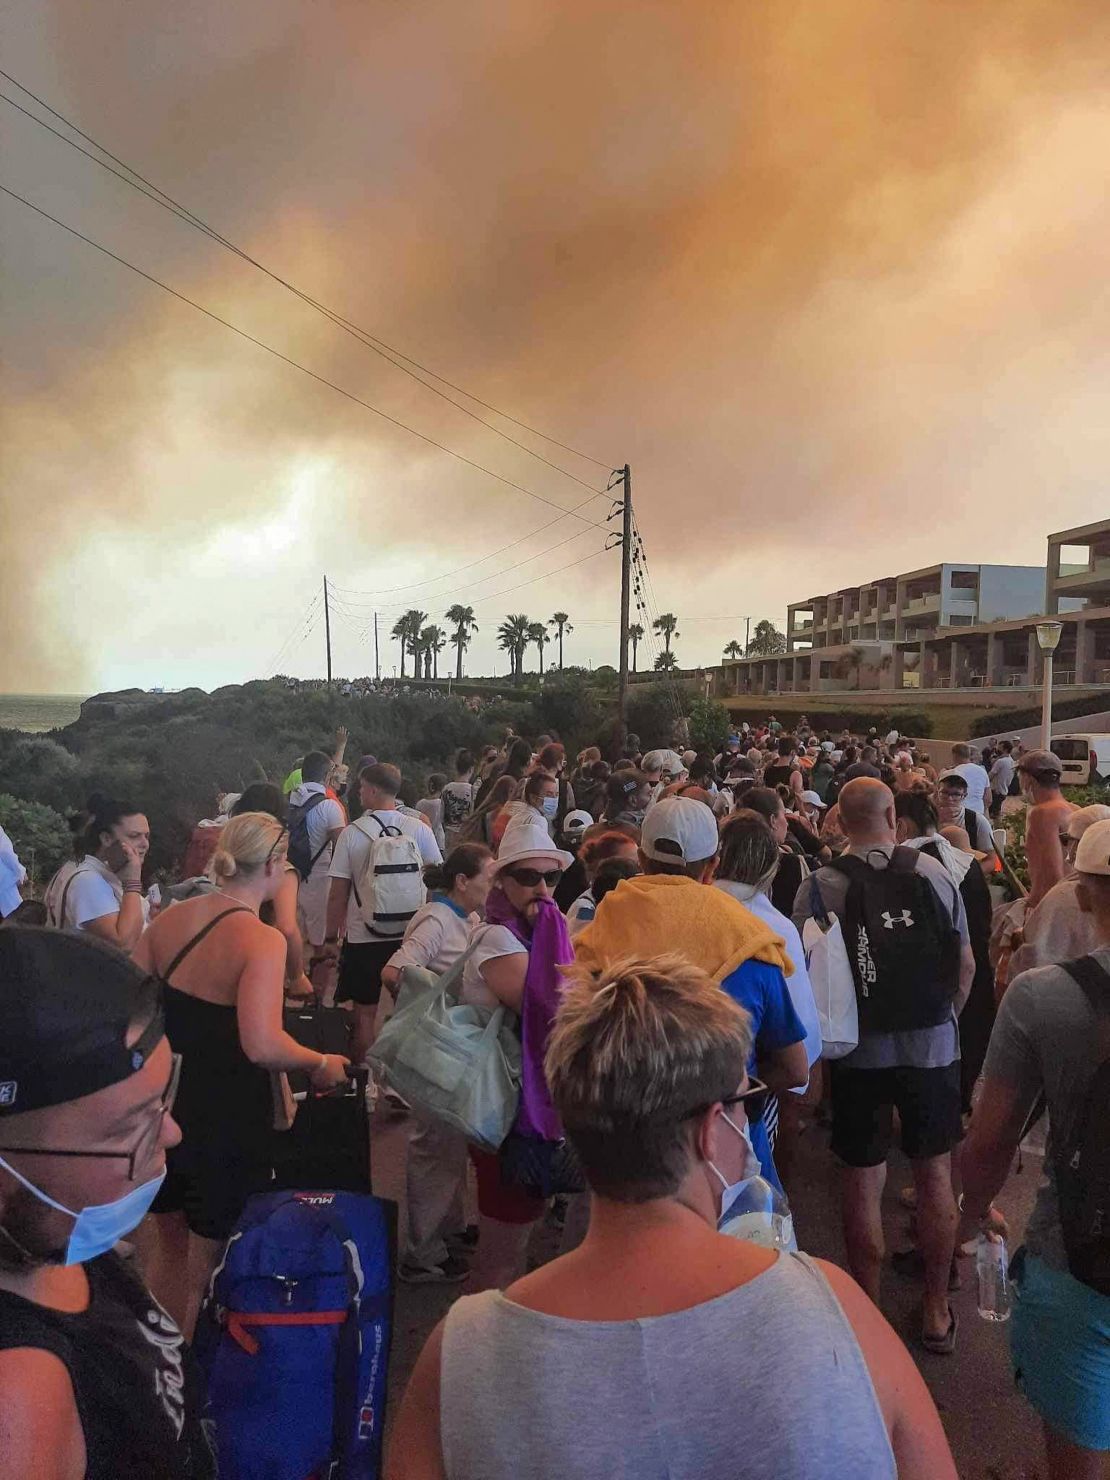 At least 12 hotels have been evacuated, officials say.